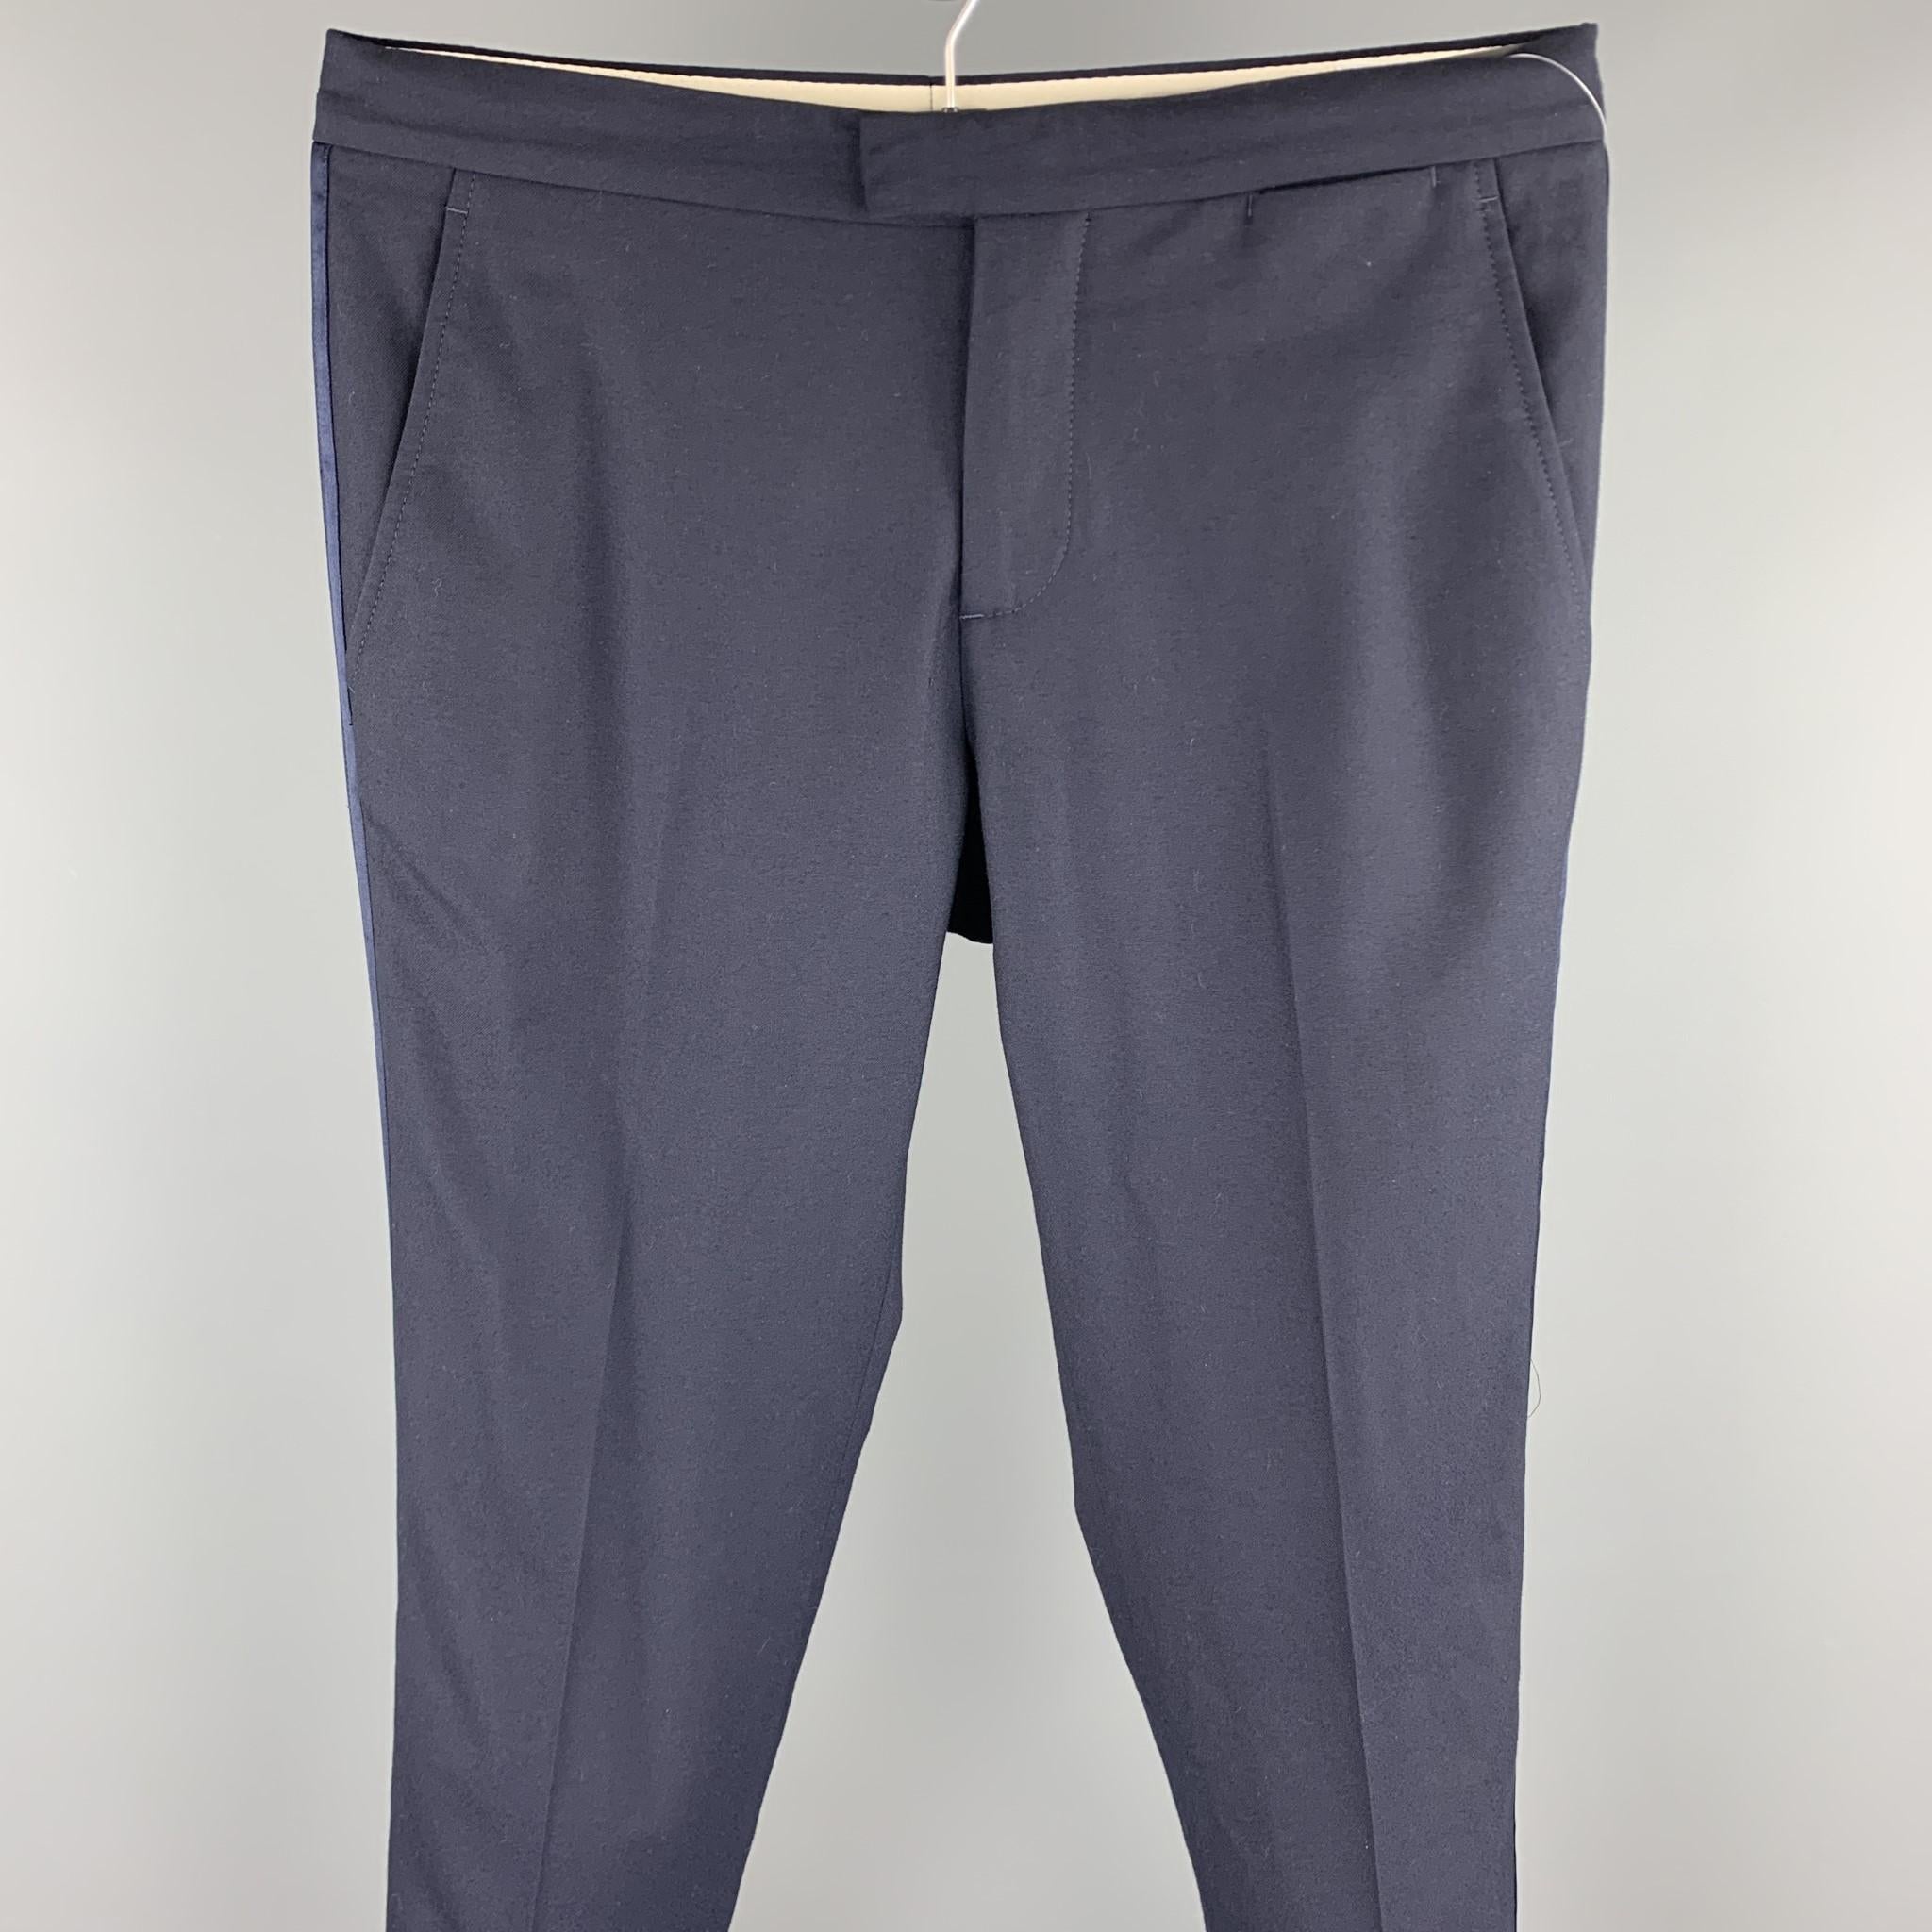 BRUNELLO CUCINELLI dress pants comes in a navy wool featuring a flat front, tuxedo stripe, and a zip fly closure. Made in Italy.

Excellent Pre-Owned Condition.
Marked: IT 48

Measurements:

Waist: 34 in.
Rise: 9 in. 
Inseam: 30 in. 